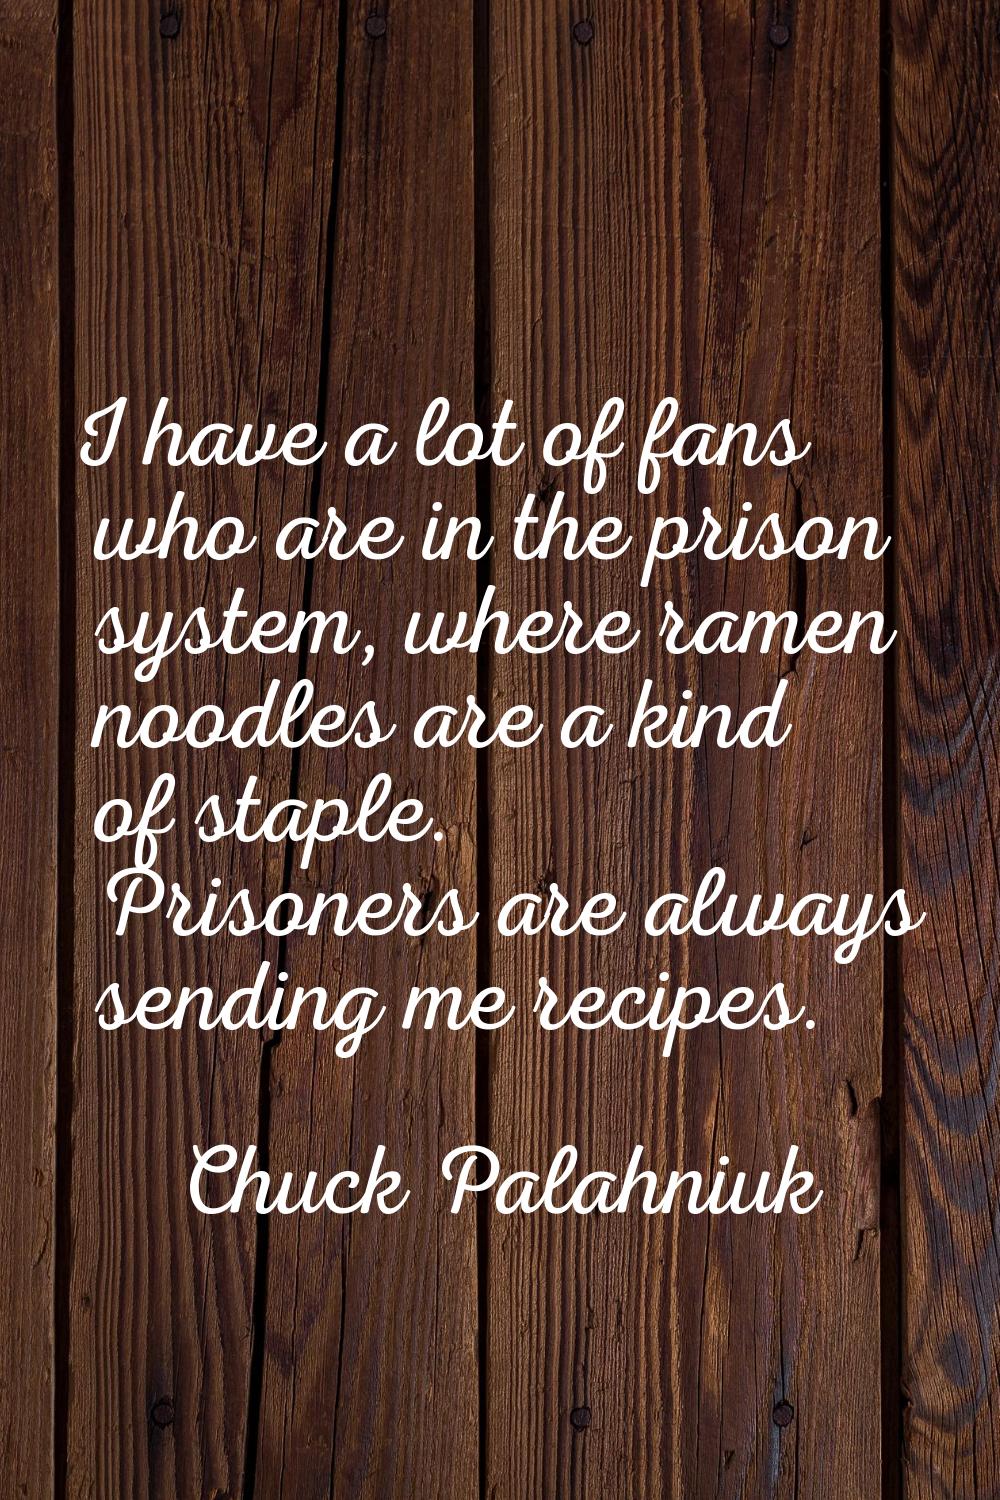 I have a lot of fans who are in the prison system, where ramen noodles are a kind of staple. Prison